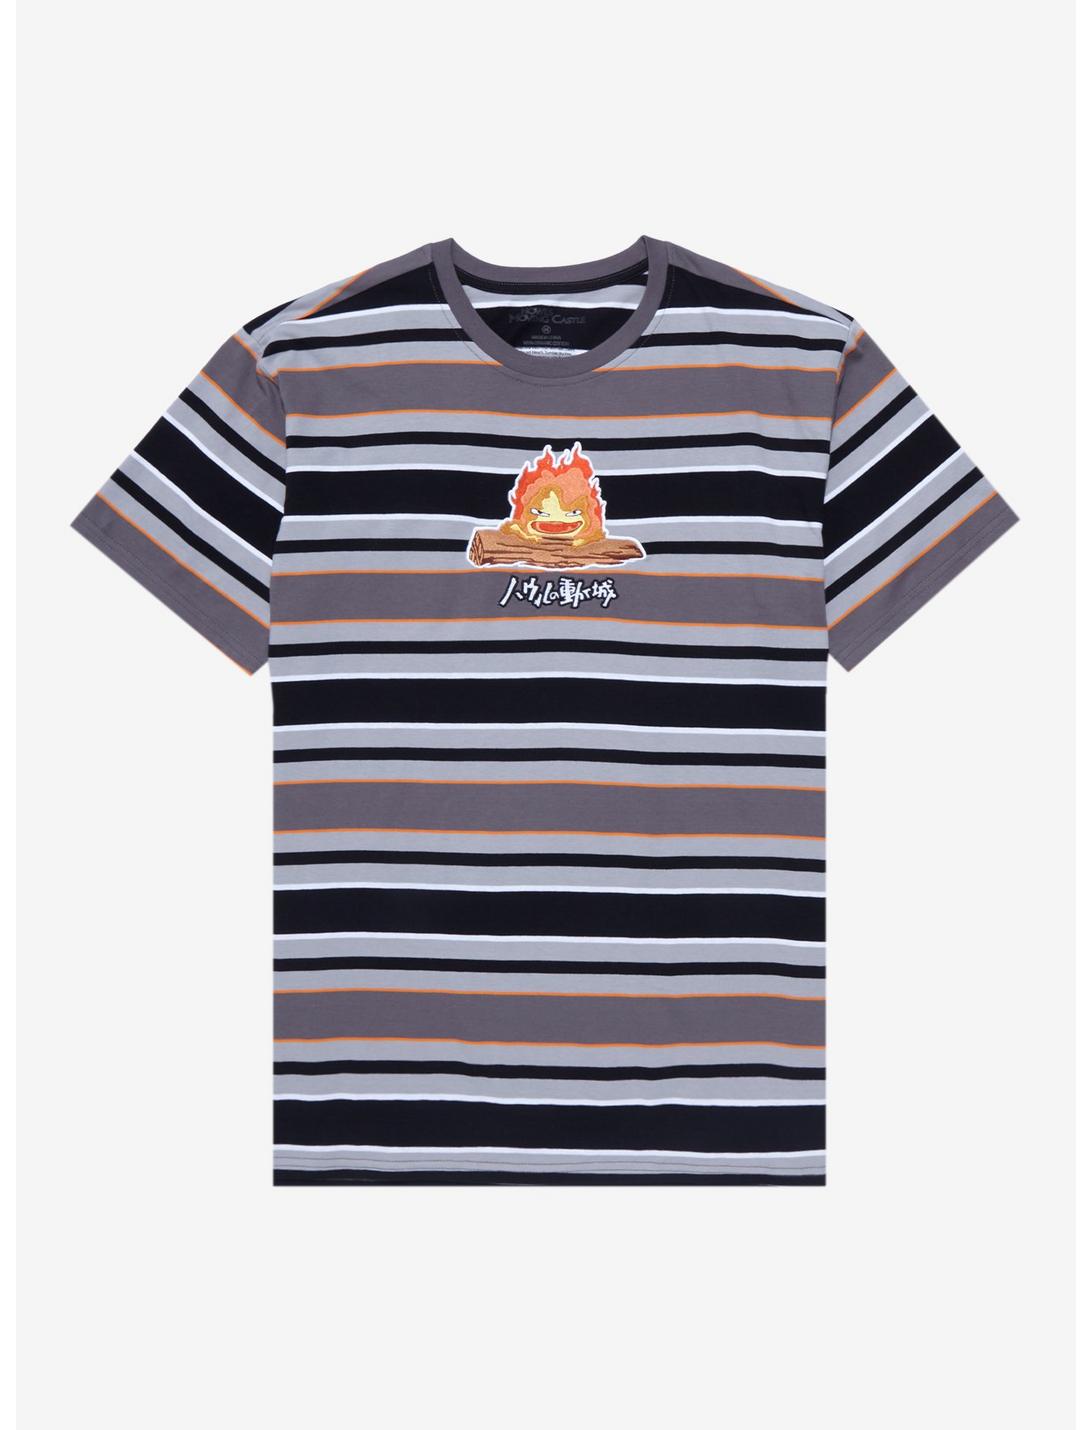 Studio Ghibli Howl's Moving Castle Calcifer Embroidered Striped T-Shirt - BoxLunch Exclusive, MULTI STRIPE, hi-res